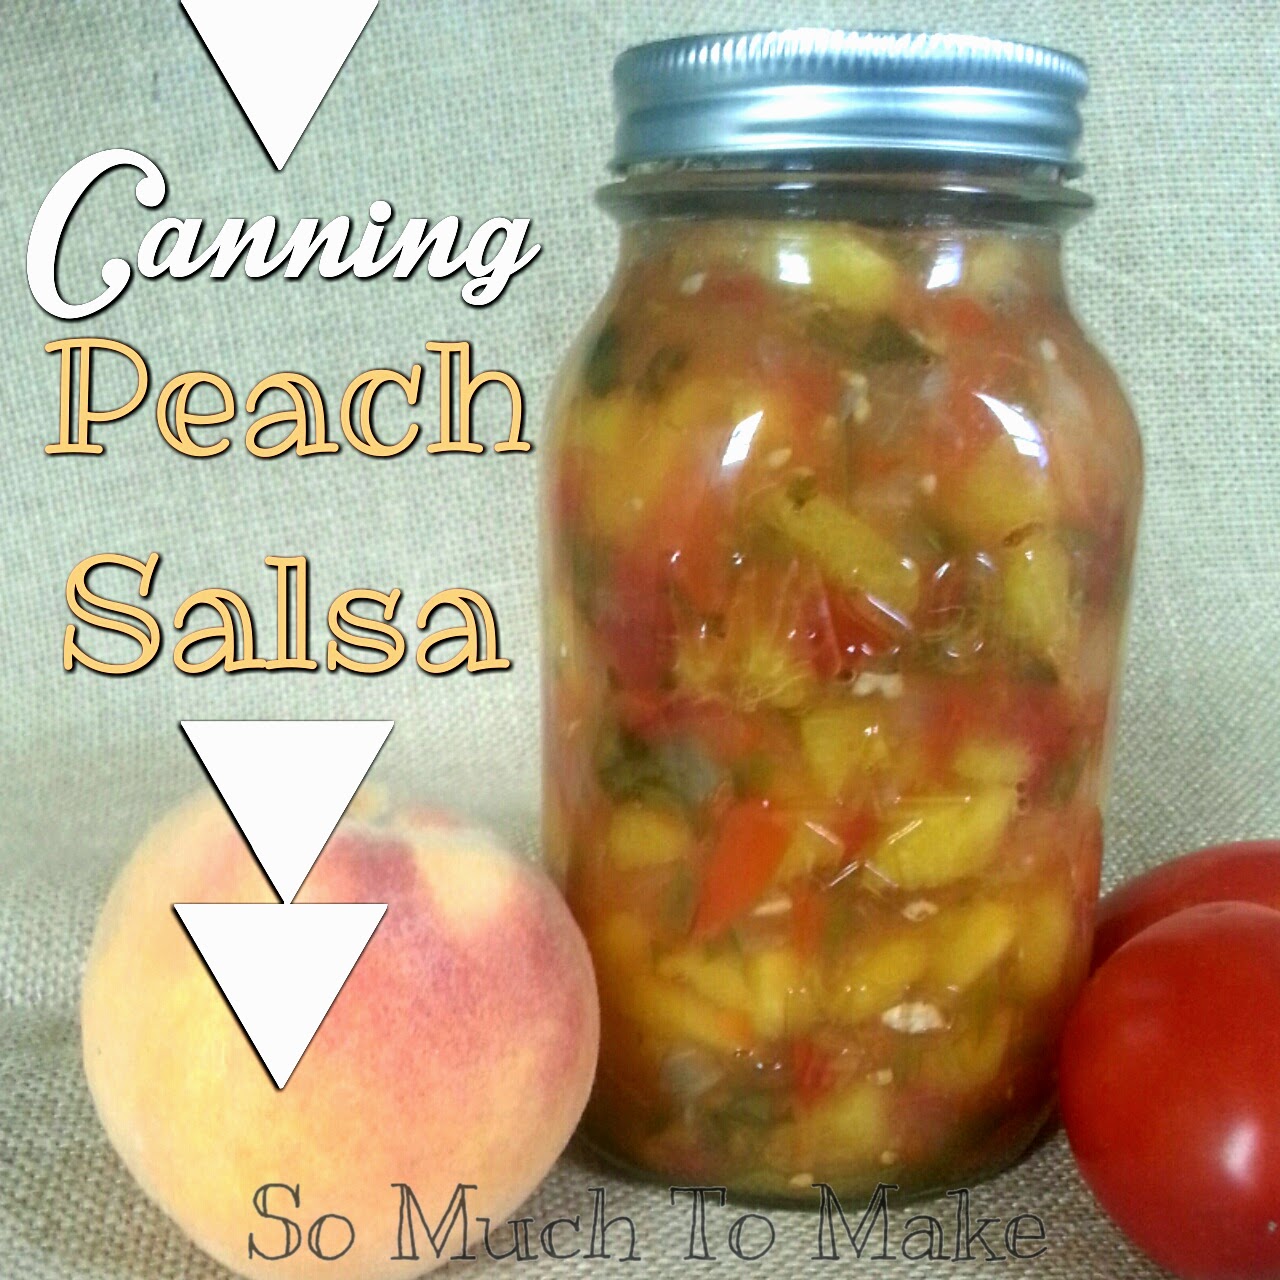 So Much To Make Canning Peach Salsa